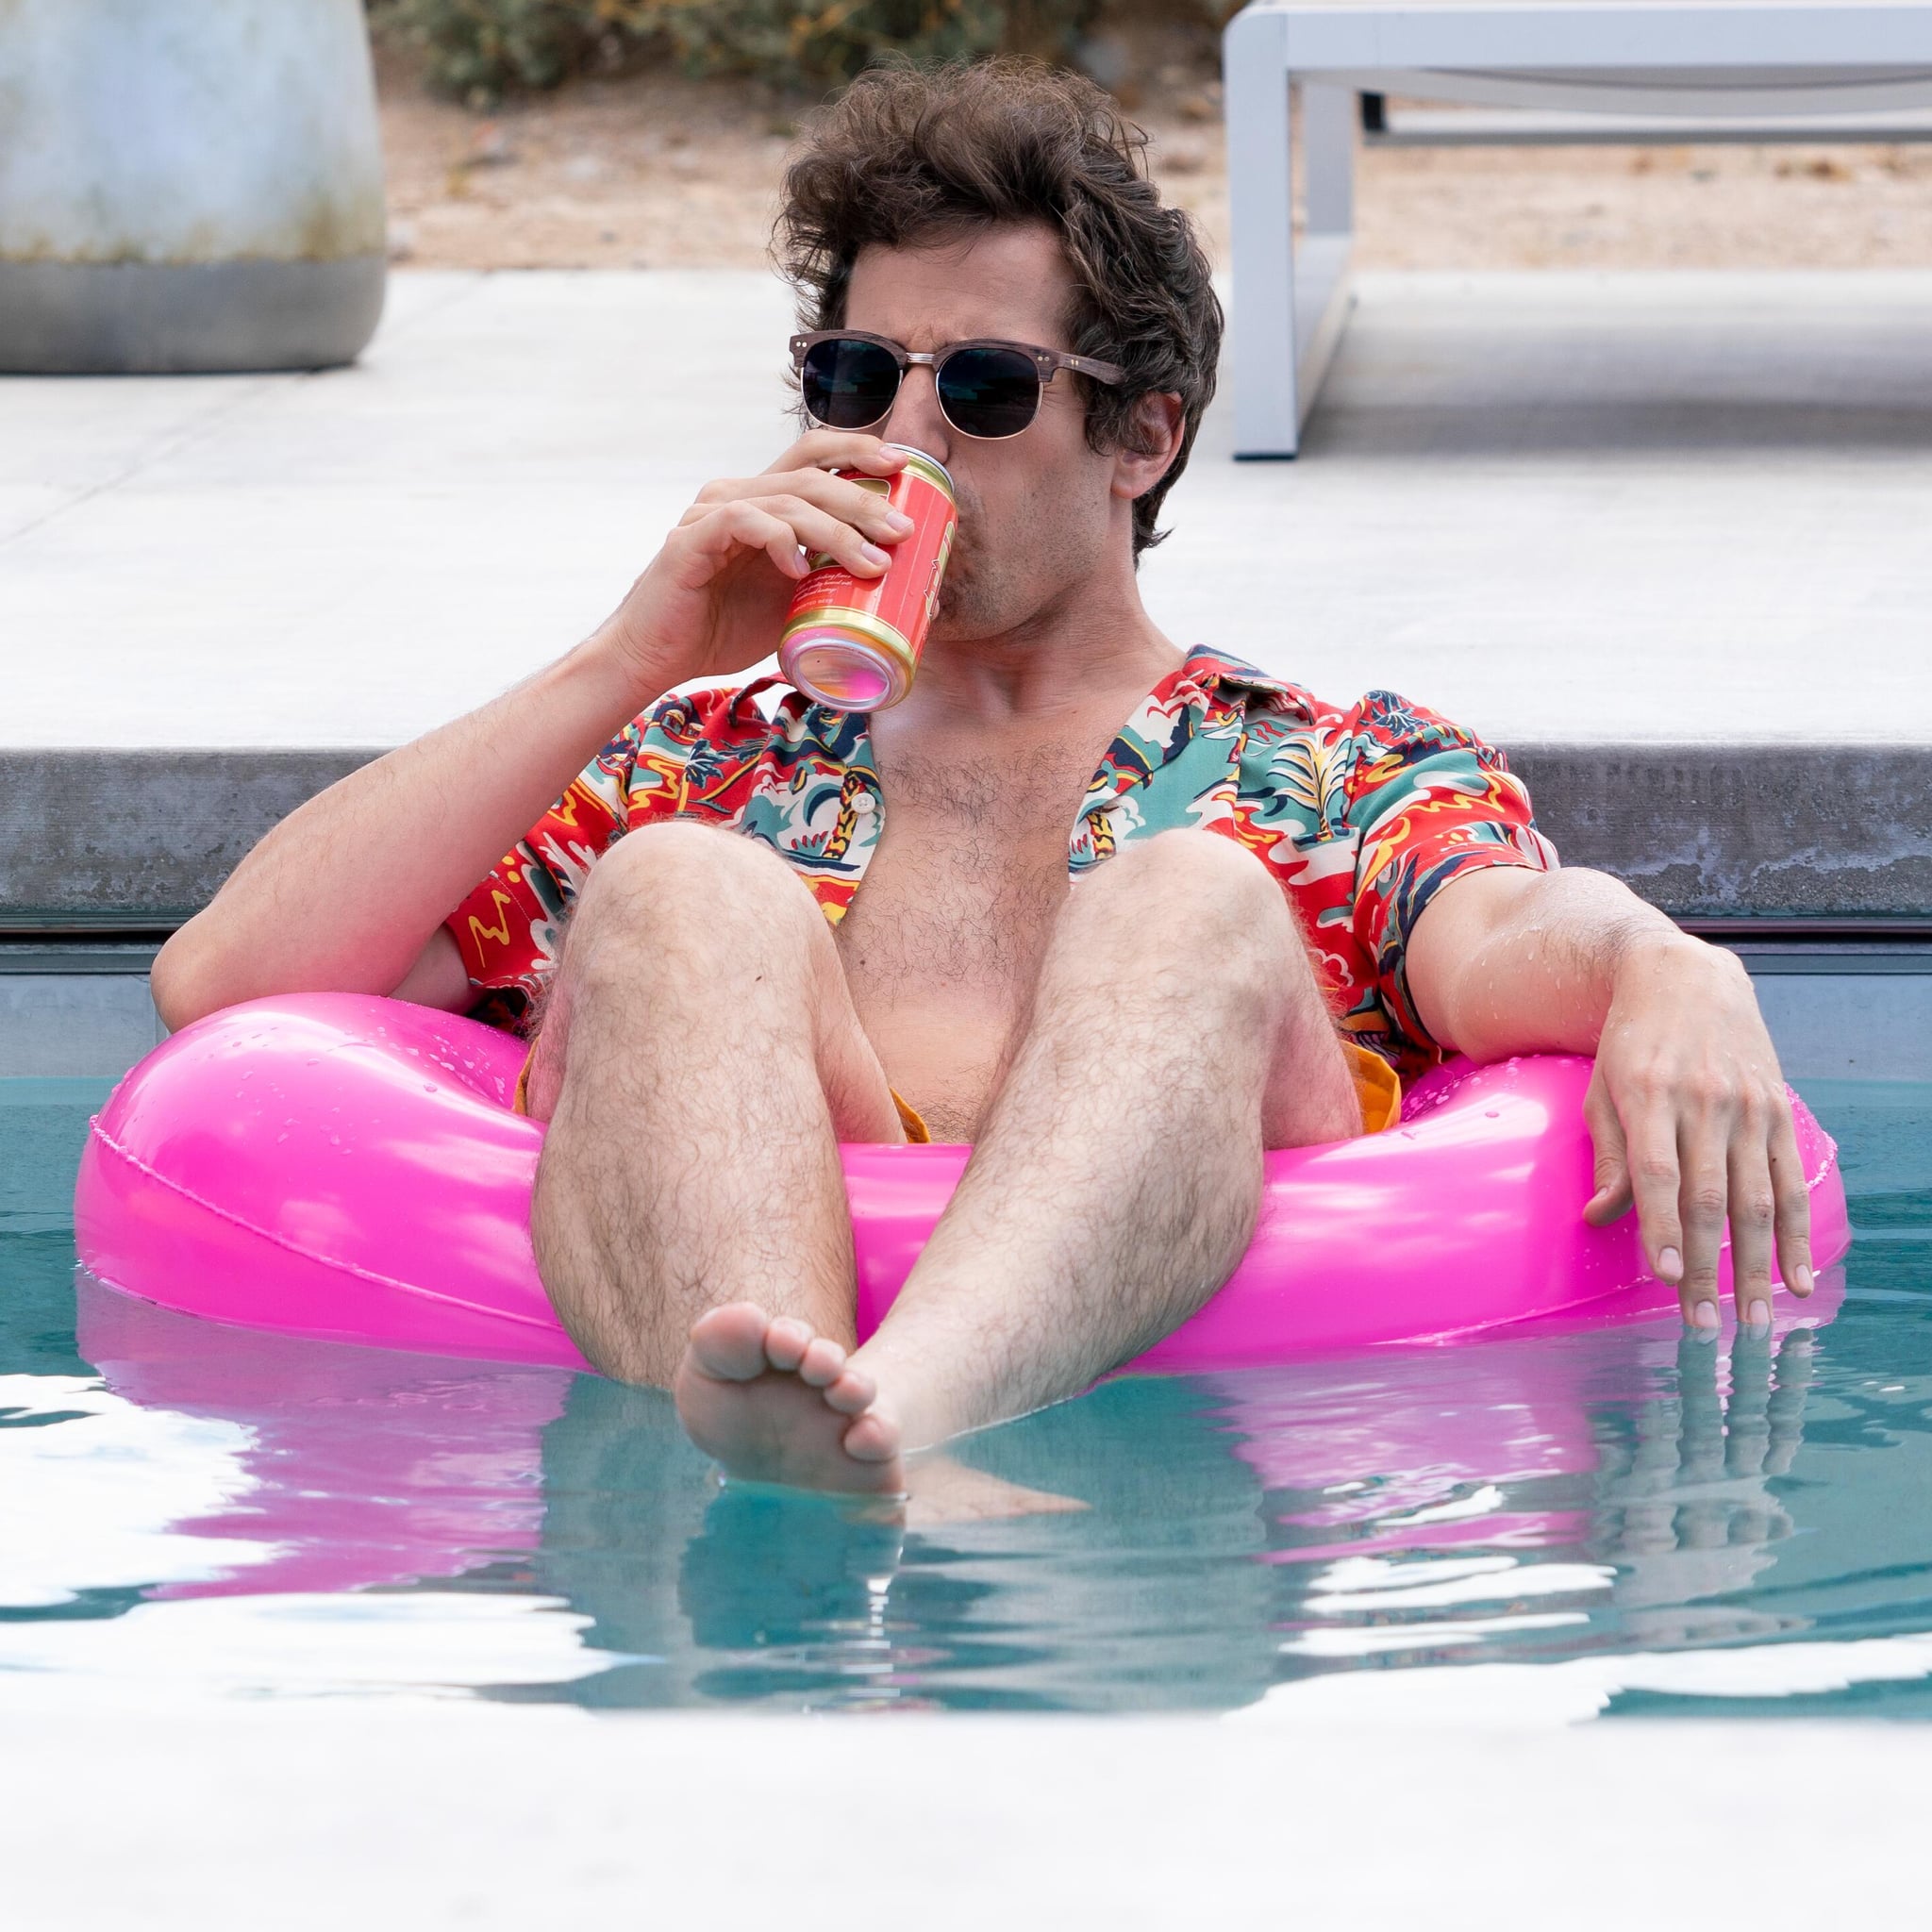 A man wearing sunglasses and a Hawaiian shirt floats in a pool drinking beer.